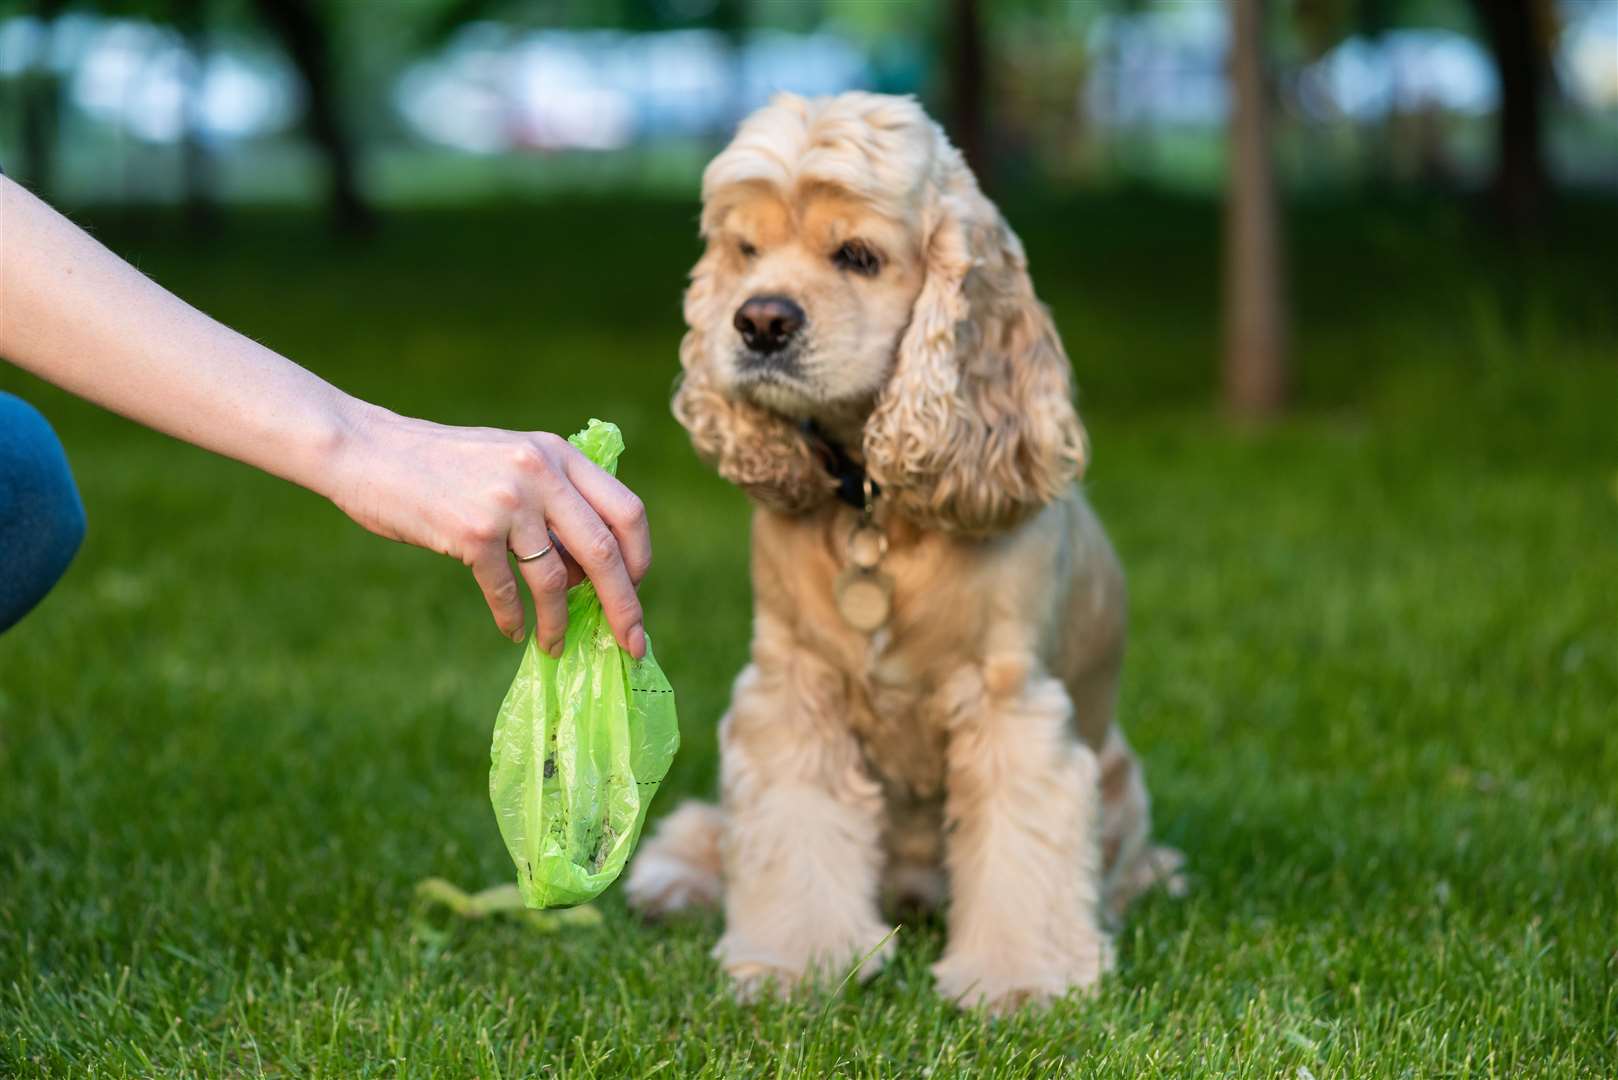 Green dog poo may be caused because your dog has eaten too much grass. Photo: istock/O_Lypa